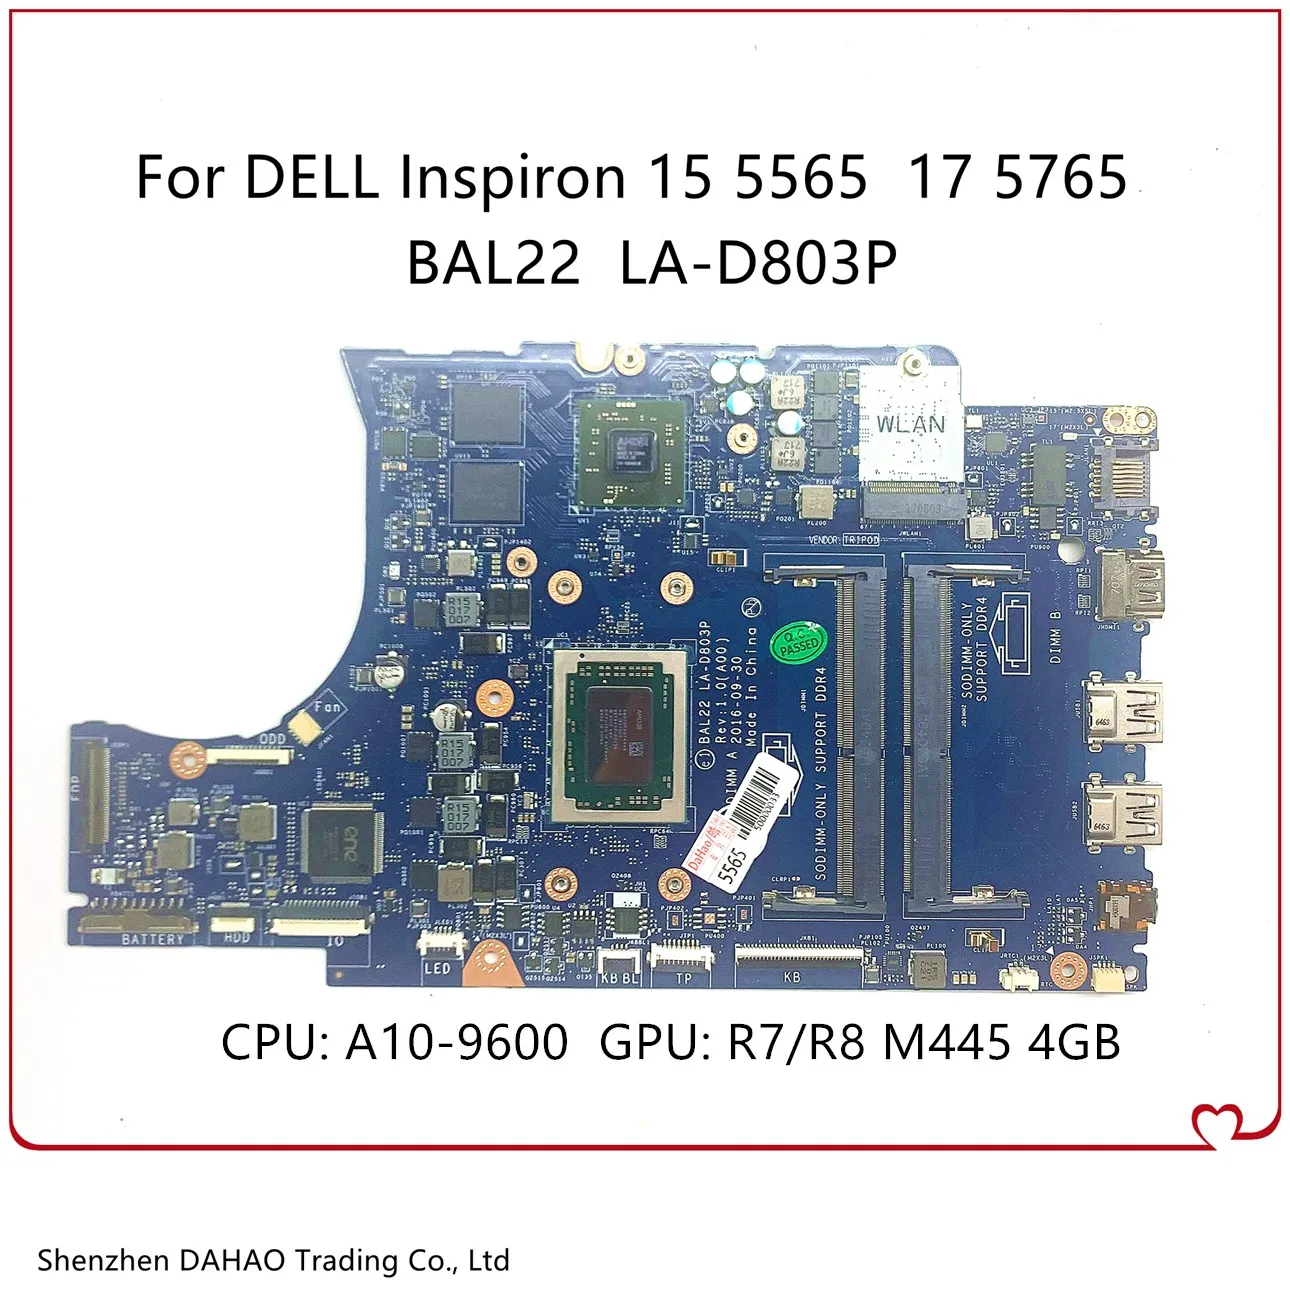 

CN-0R1WJH For DELL Inspiron 15 5565 17 5765 Laptop Motherboard BAL22 LA-D803P 0R1WJH R1WJH With A10-9600 CPU R7/R8 M445 4G-GPU